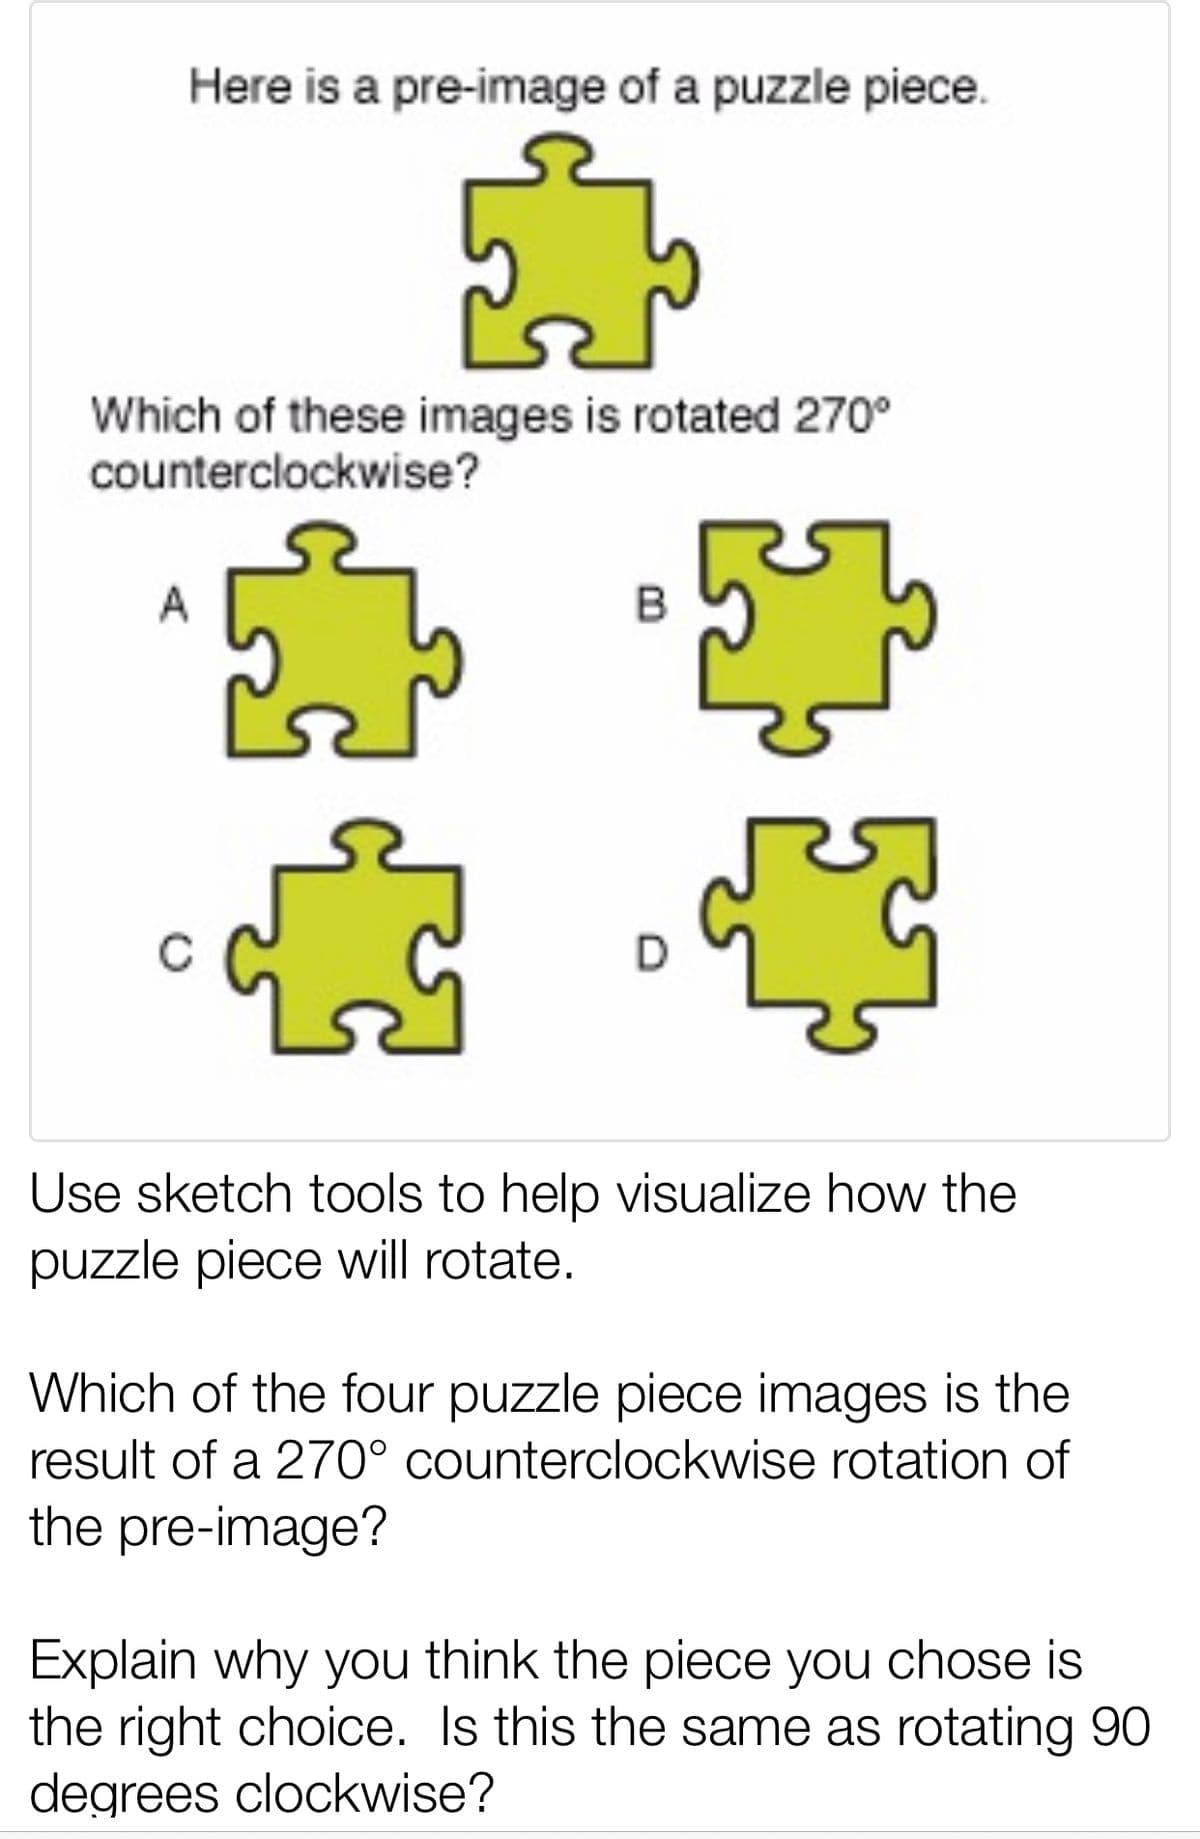 Here is a pre-image of a puzzle piece.
Which of these images is rotated 270°
counterclockwise?
Use sketch tools to help visualize how the
puzzle piece will rotate.
Which of the four puzzle piece images is the
result of a 270° counterclockwise rotation of
the pre-image?
Explain why you think the piece you chose is
the right choice. Is this the same as rotating 90
degrees clockwise?
